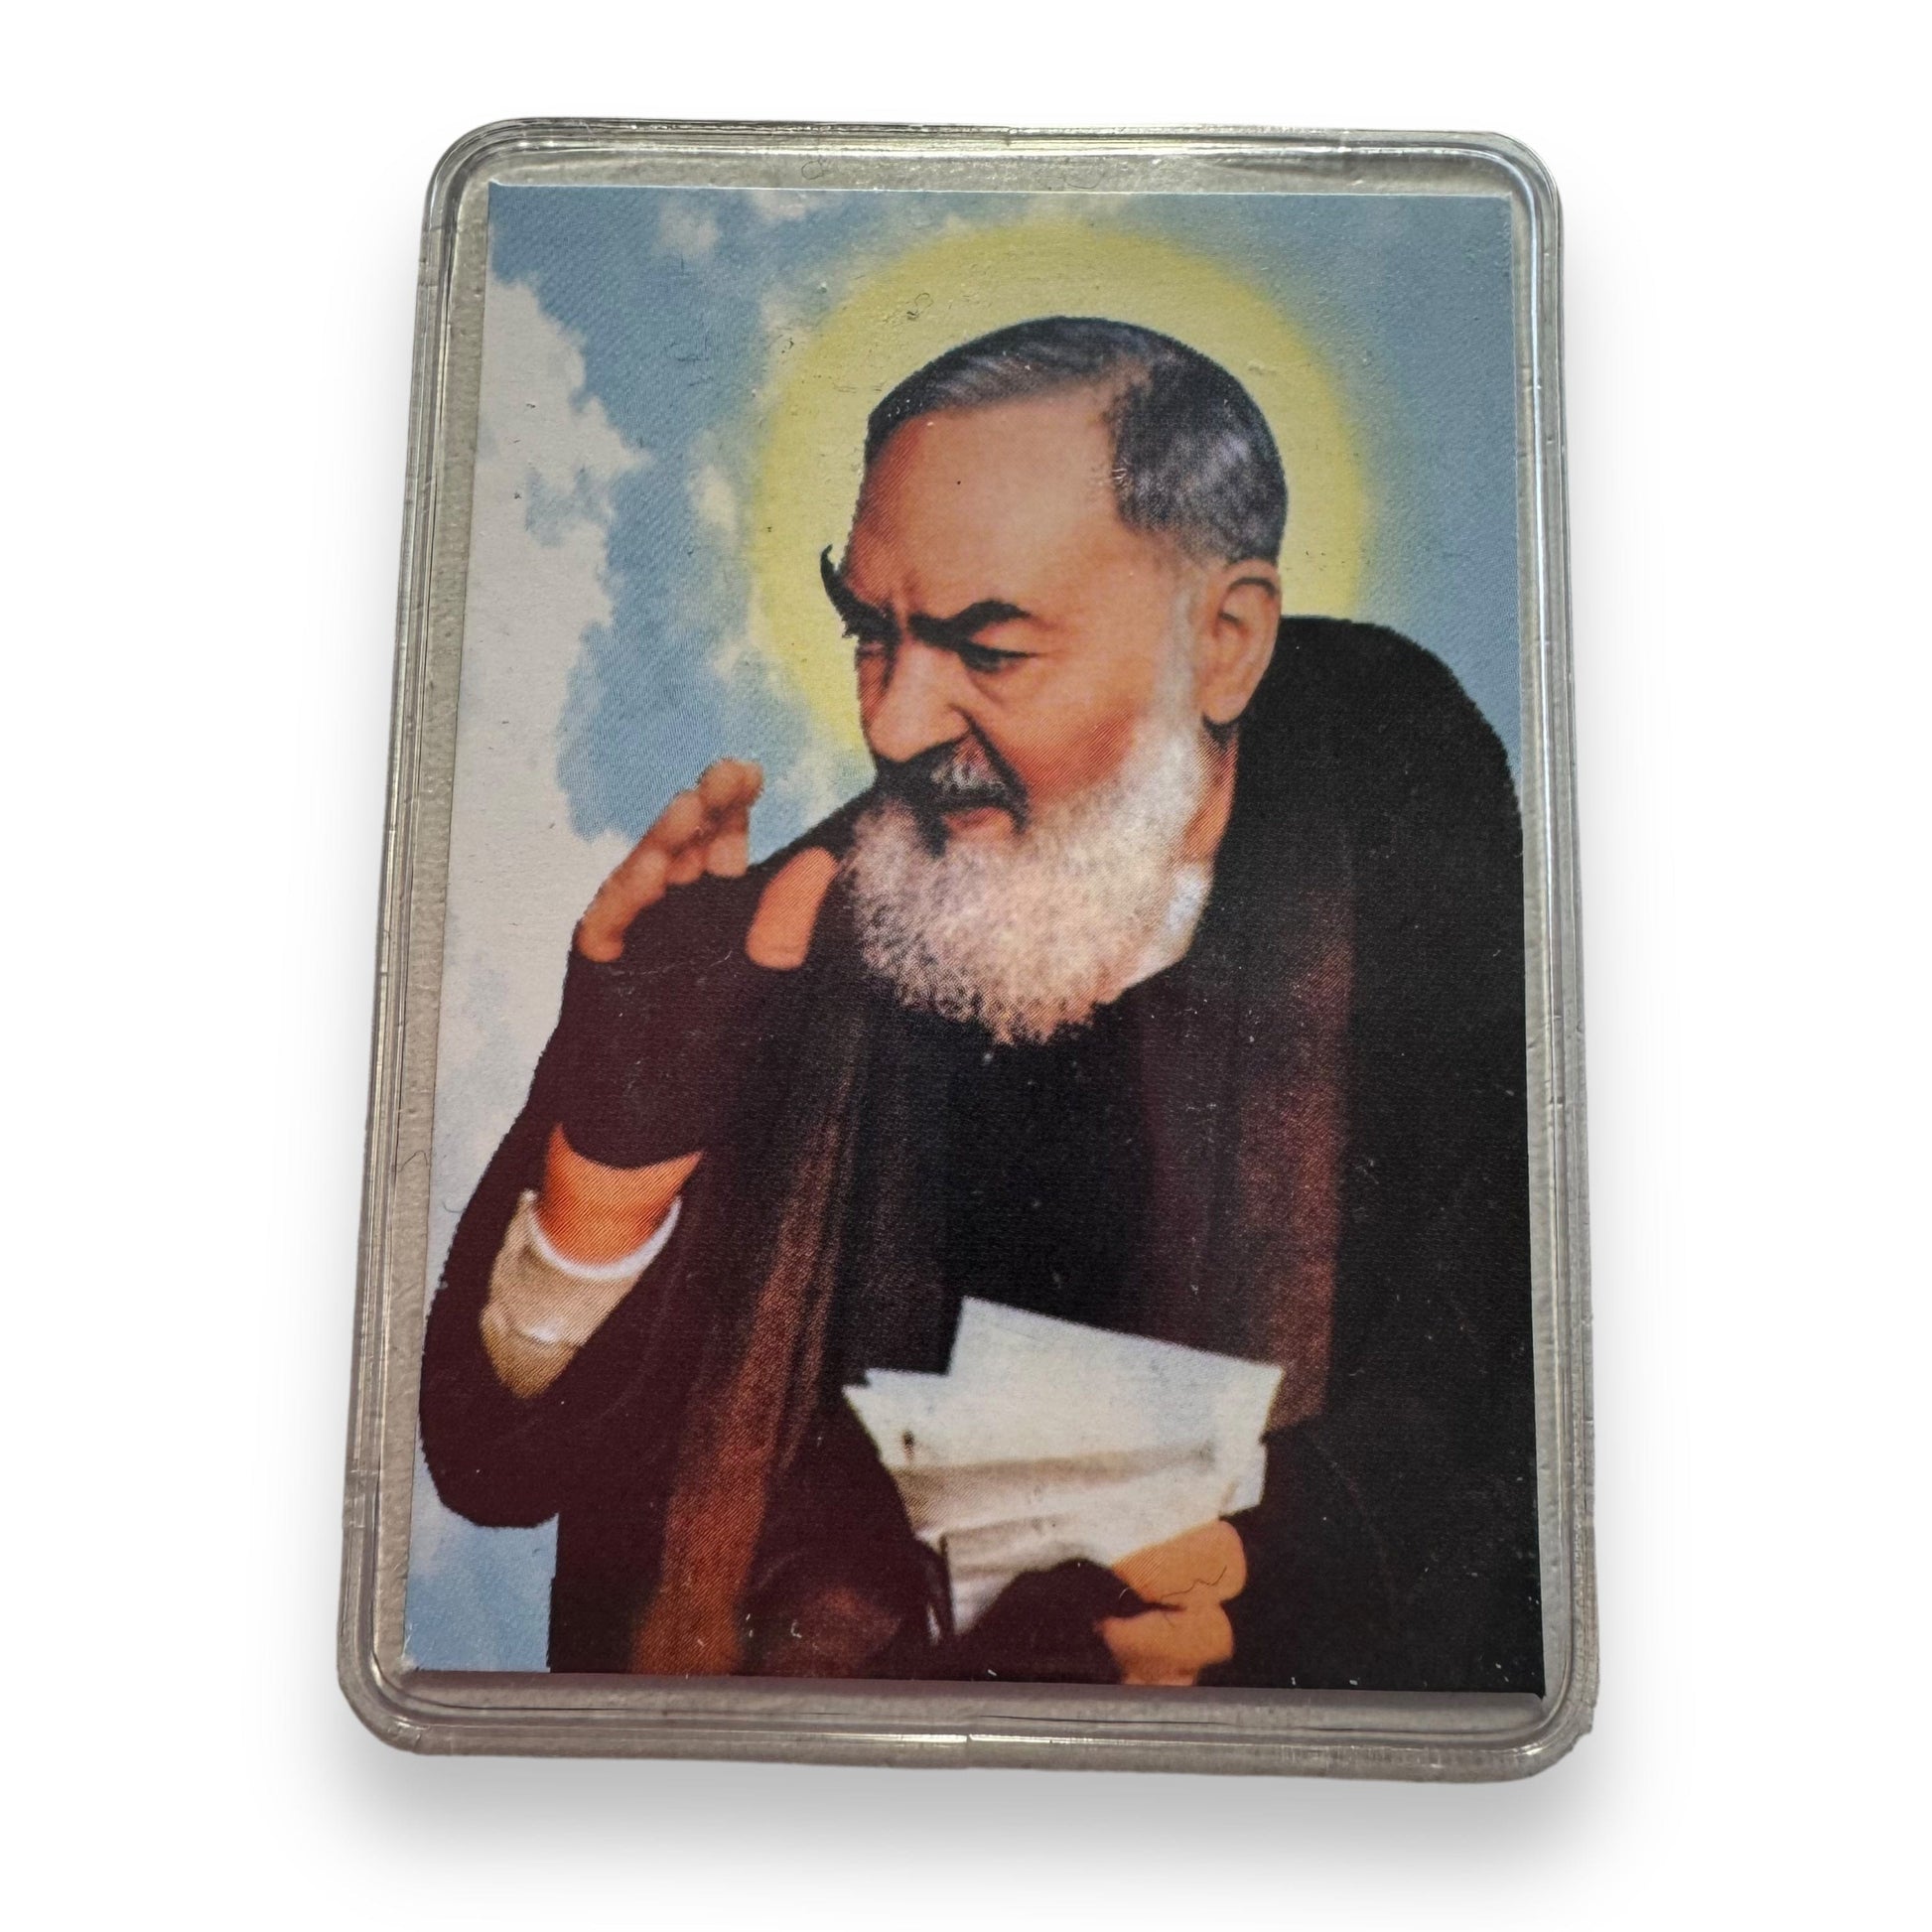 Catholically Holy Card St. Pio Old Holy Card | Vintage Relic card of St. Padre Pio